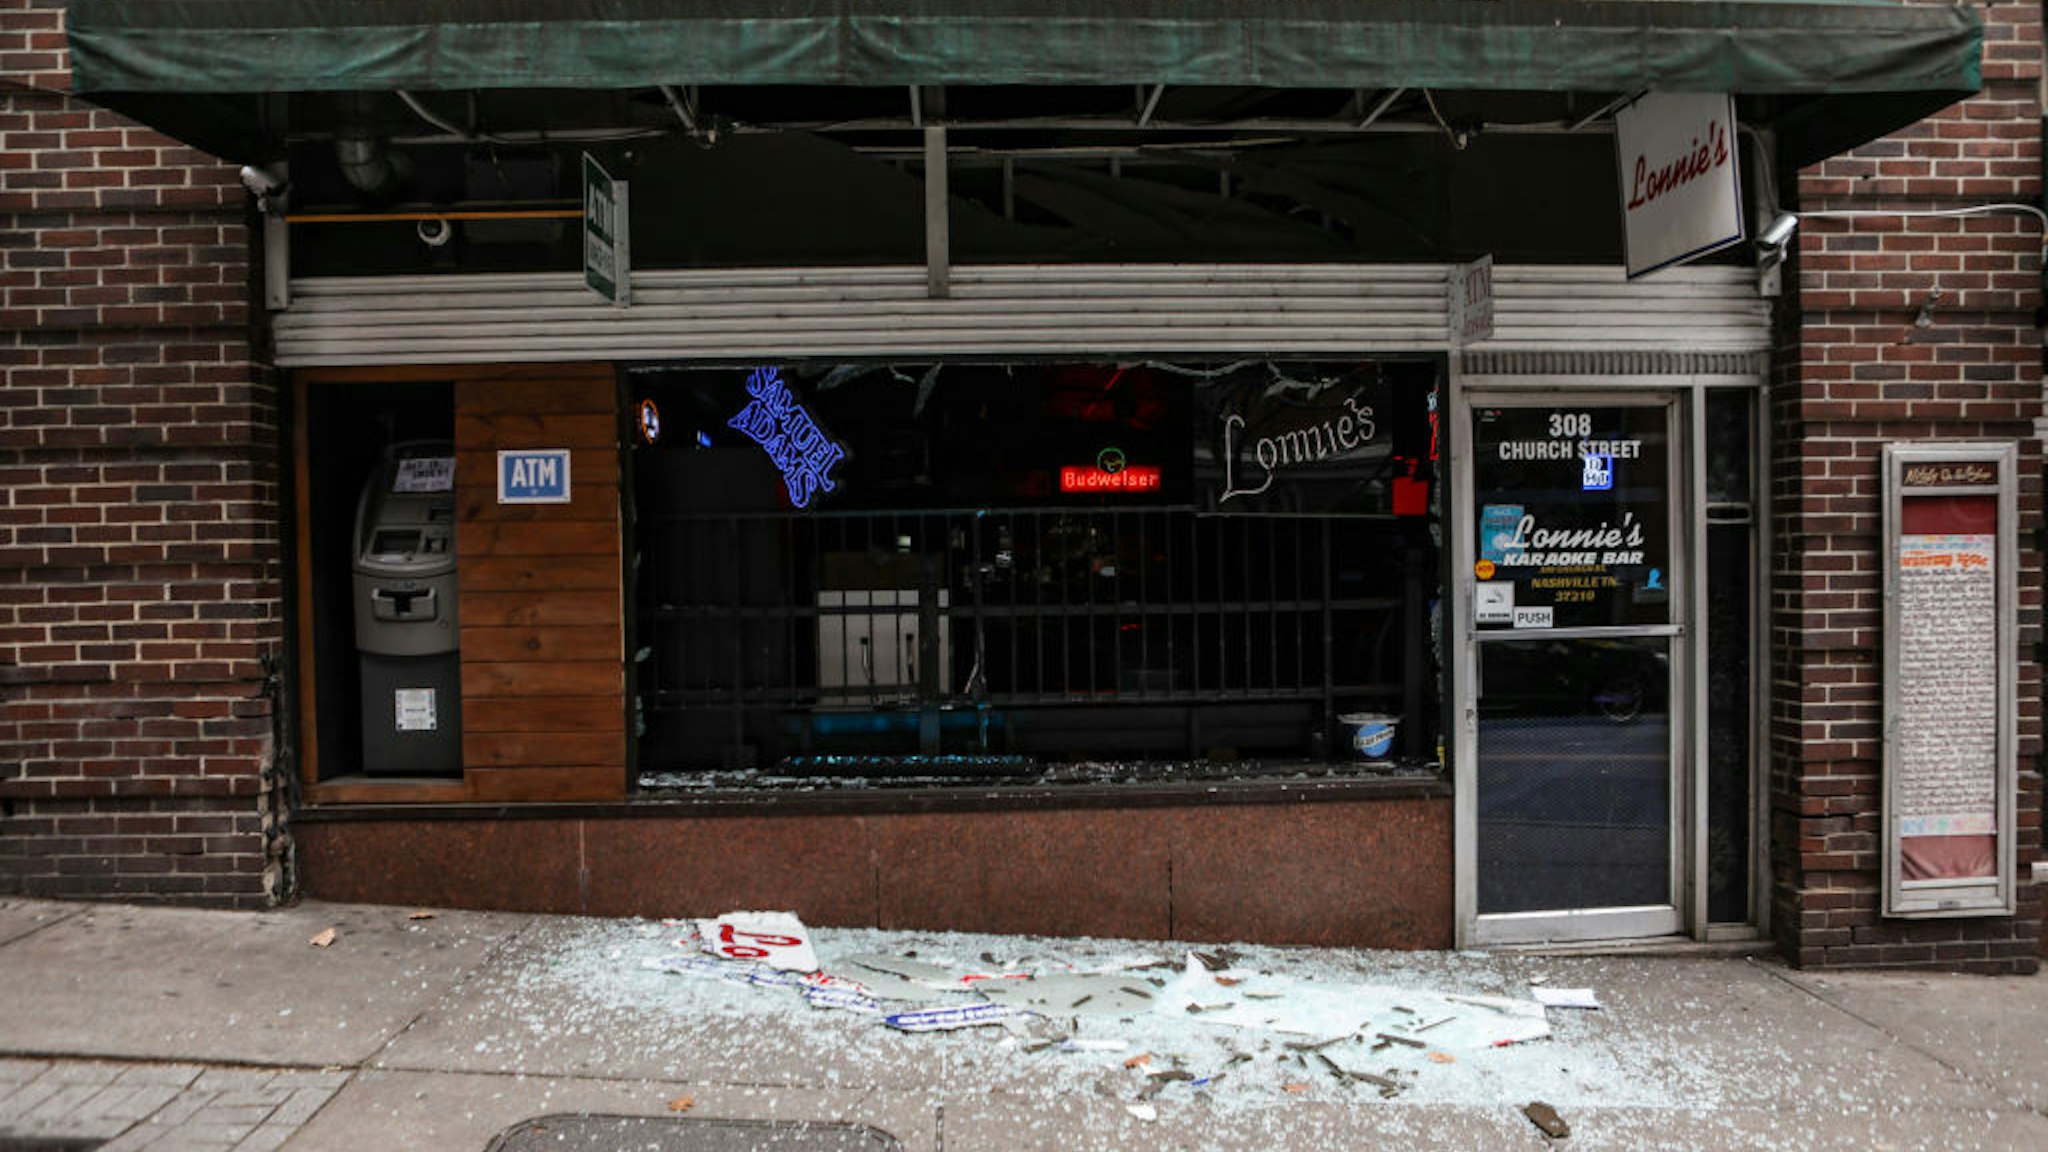 NASHVILLE, TN - DECEMBER 25: Windows are blown out of a business on Church St after an explosion on December 25, 2020 in Nashville, Tennessee. According to initial reports, a vehicle exploded downtown in the early morning hours. (Photo by Thaddaeus McAdams/Getty Images)